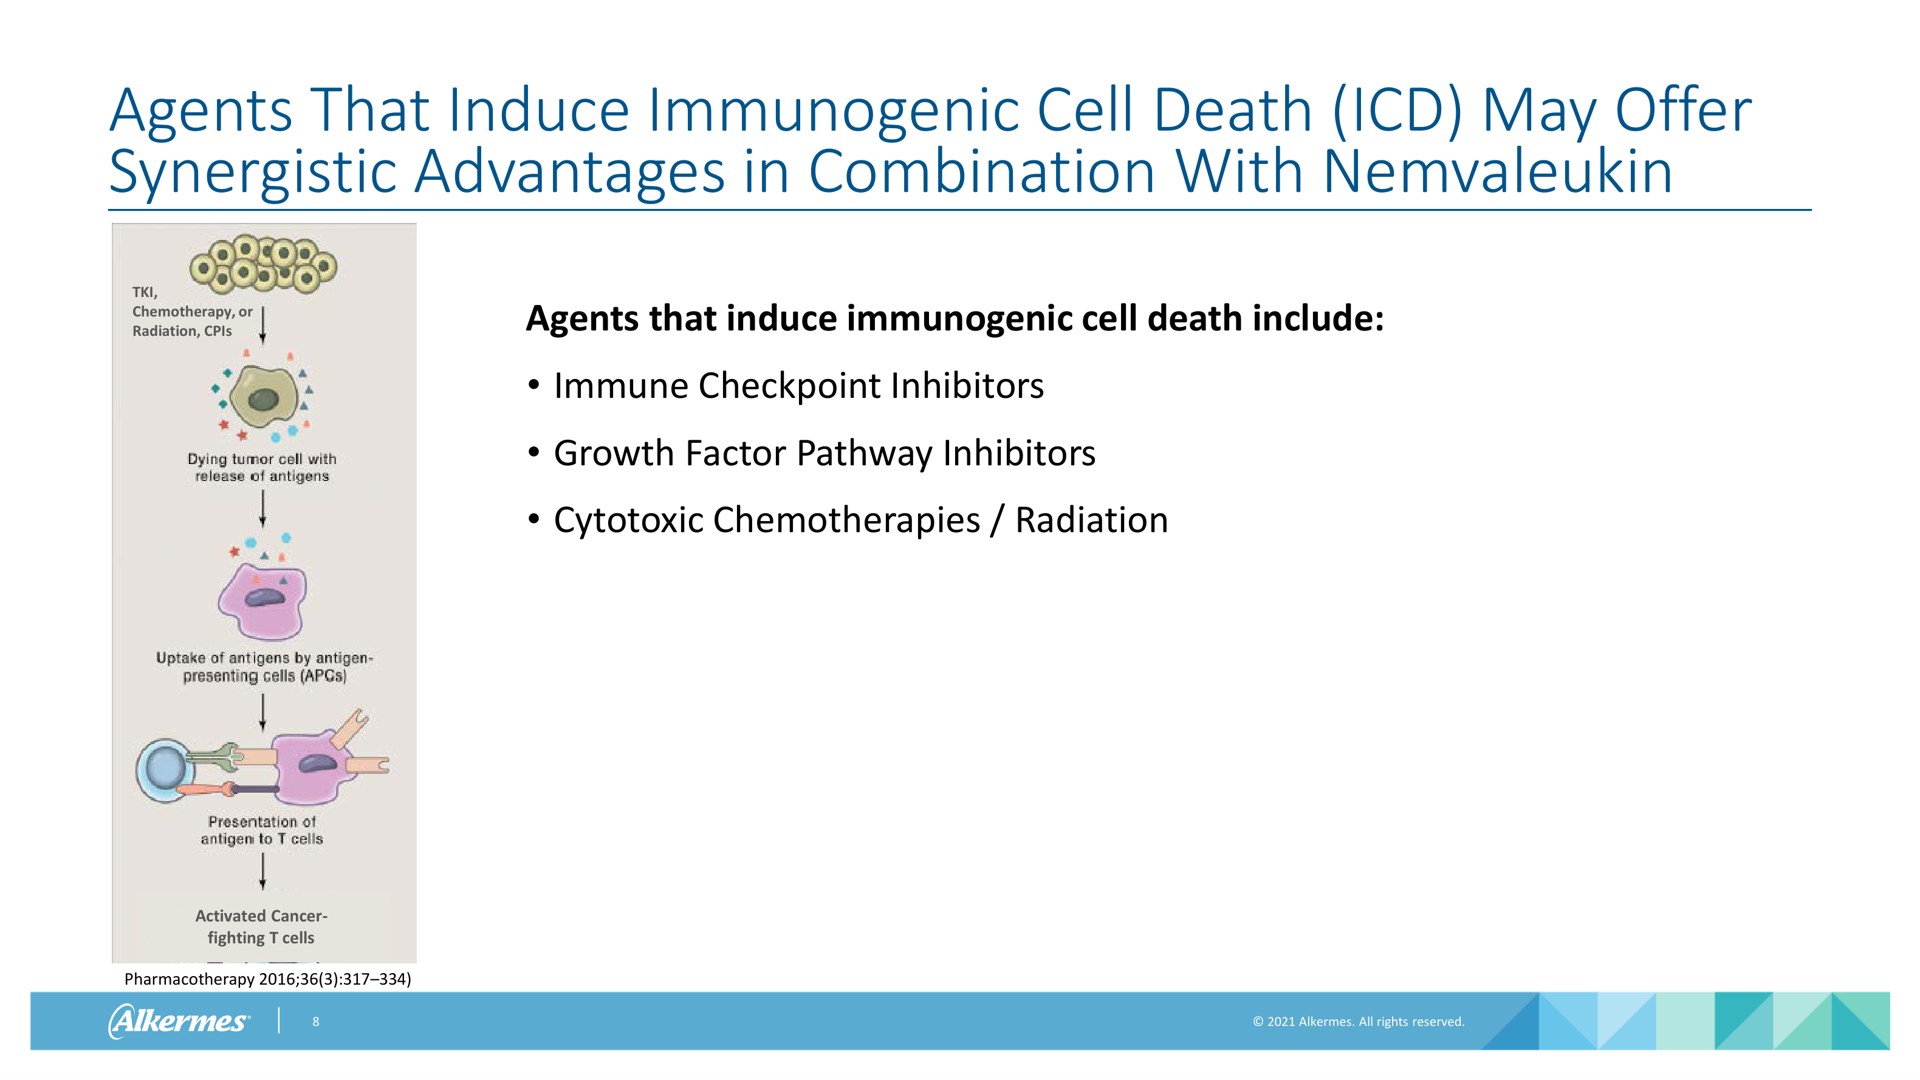 agents that induce immunogenic cell death may offer synergistic advantages in combination with chemotherapy or radiation agents that induce immunogenic cell death include immune inhibitors growth factor pathway inhibitors cytotoxic chemotherapies radiation activated cancer fighting cells pharmacotherapy | Alkermes